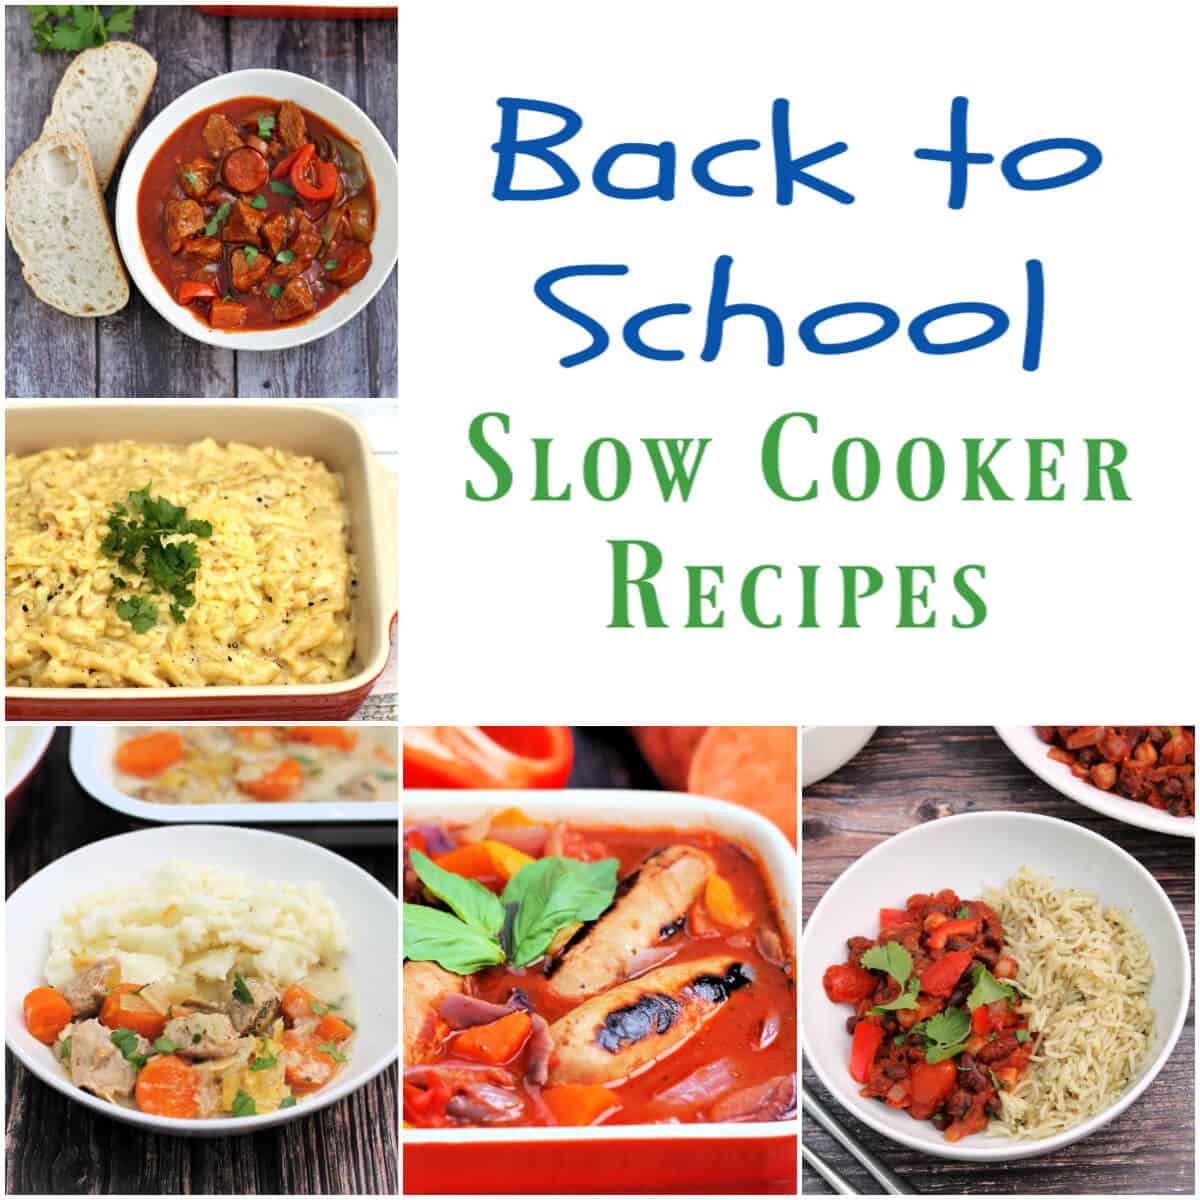 Collage of 5 back to school slow cooker dishes with text overlay "Back to school slow cooker recipes".